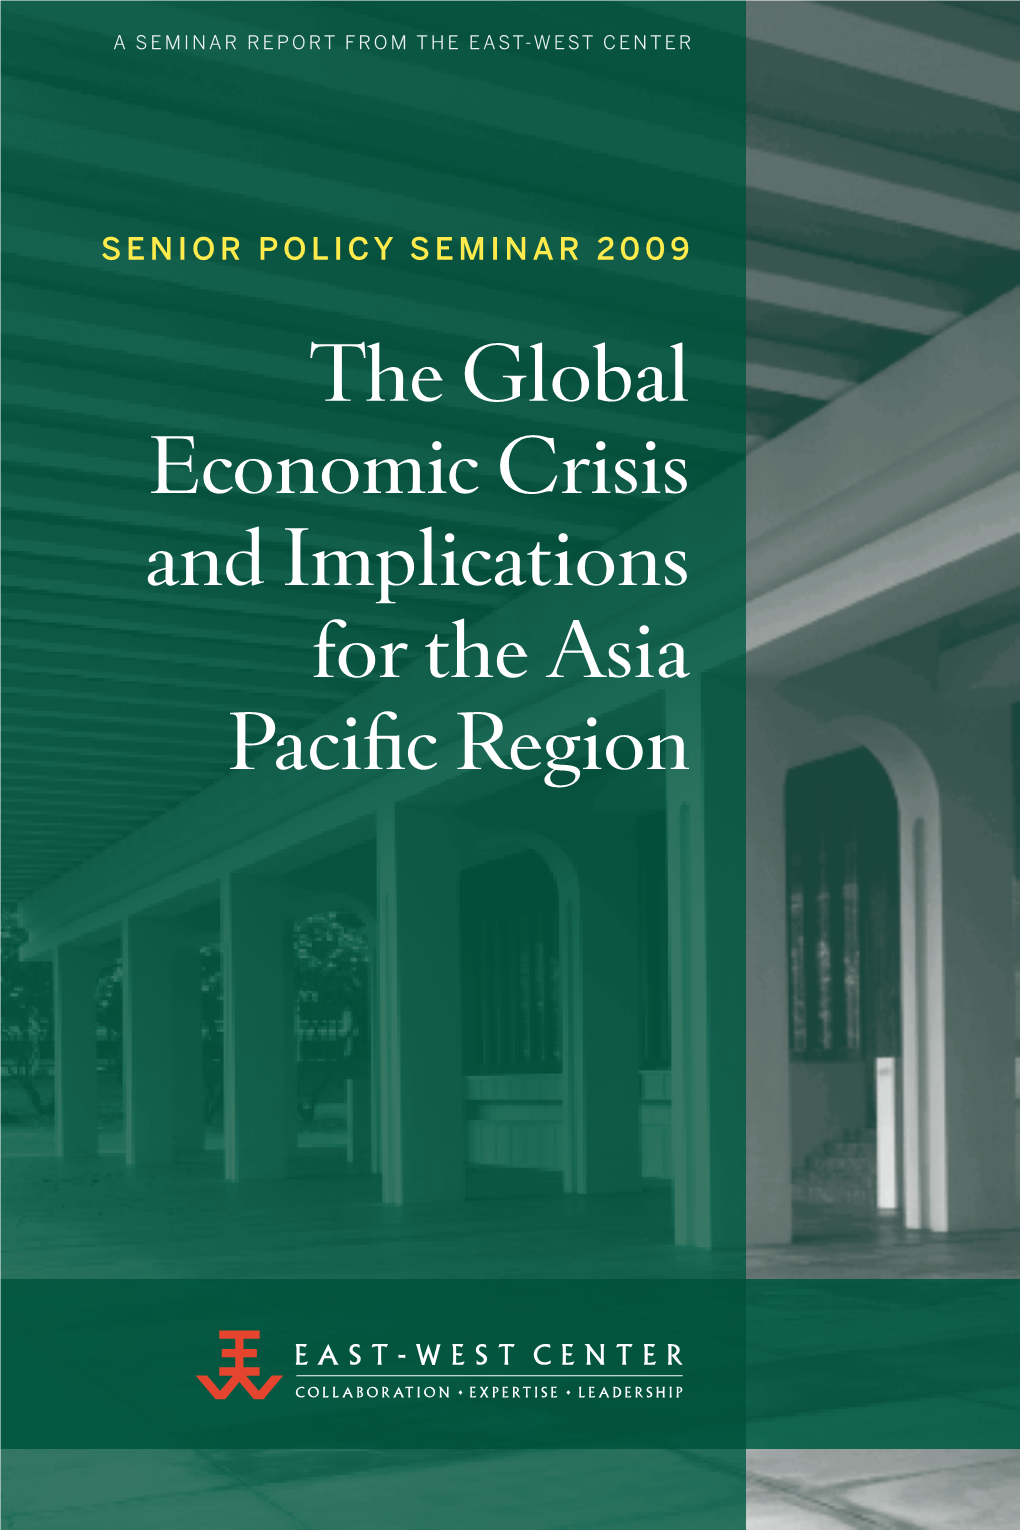 The Global Economic Crisis and Implications for the Asia Pacific